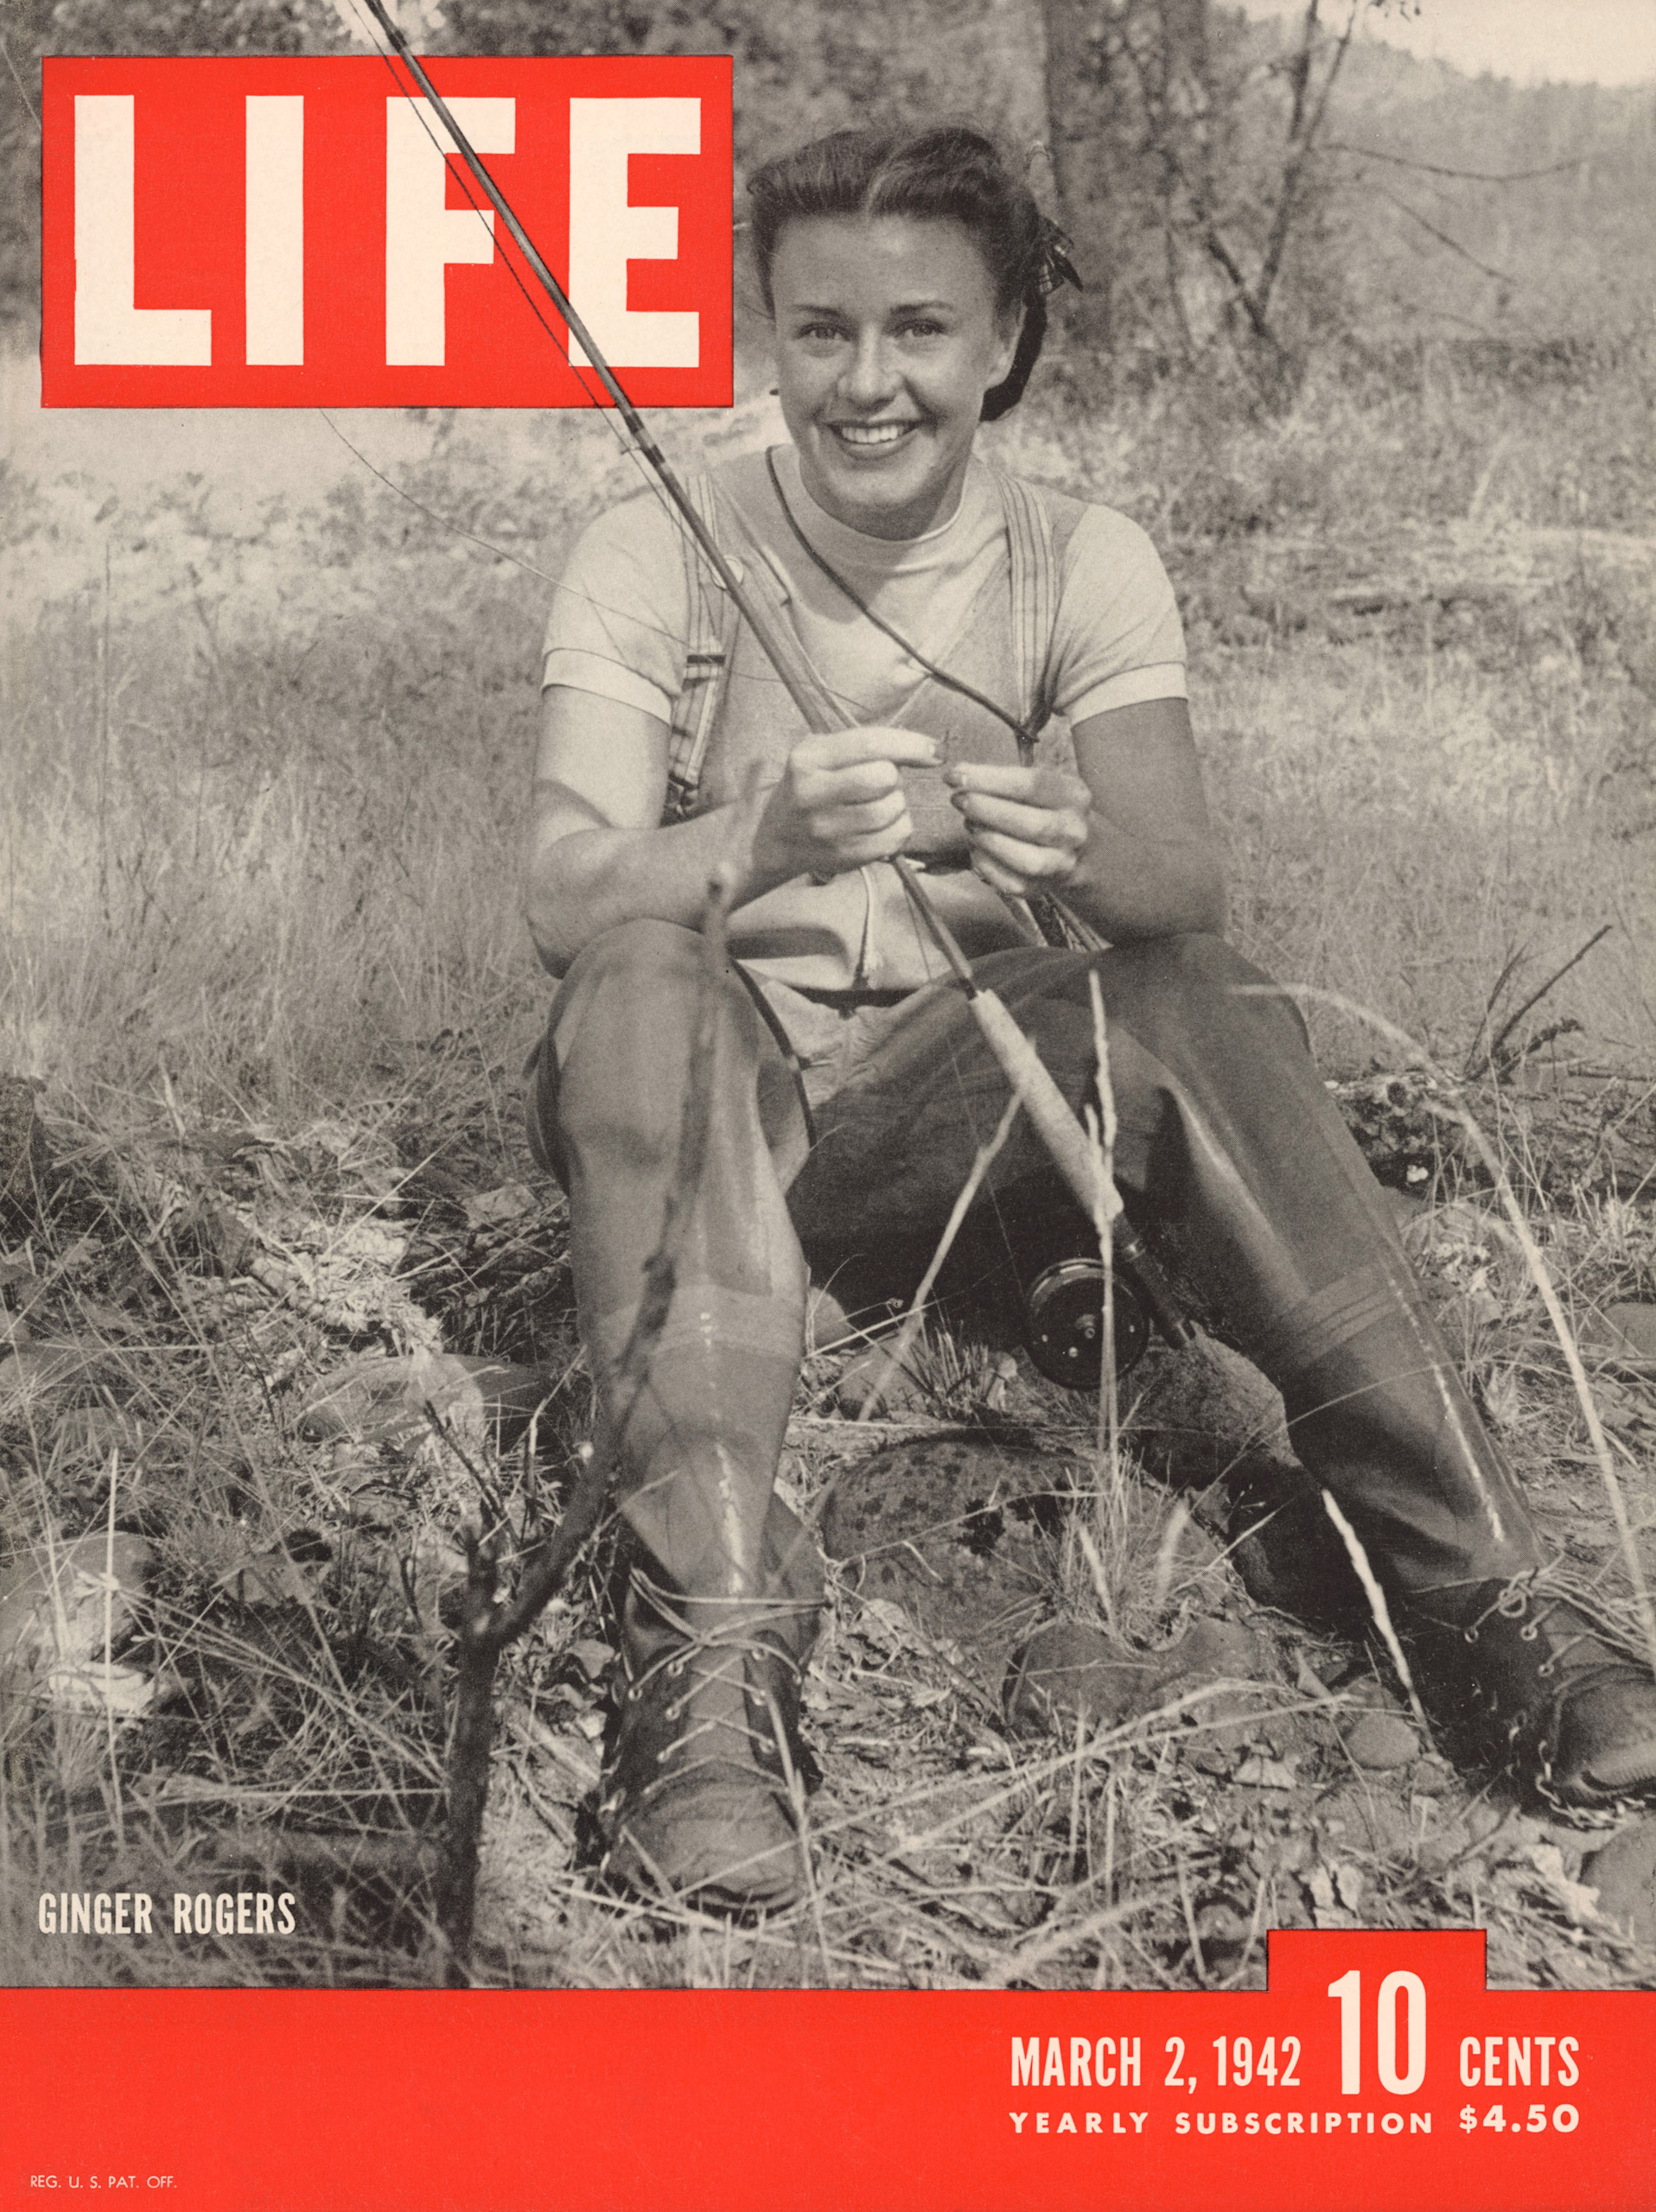 March 2, 1942 cover of LIFE magazine with Ginger Rogers.